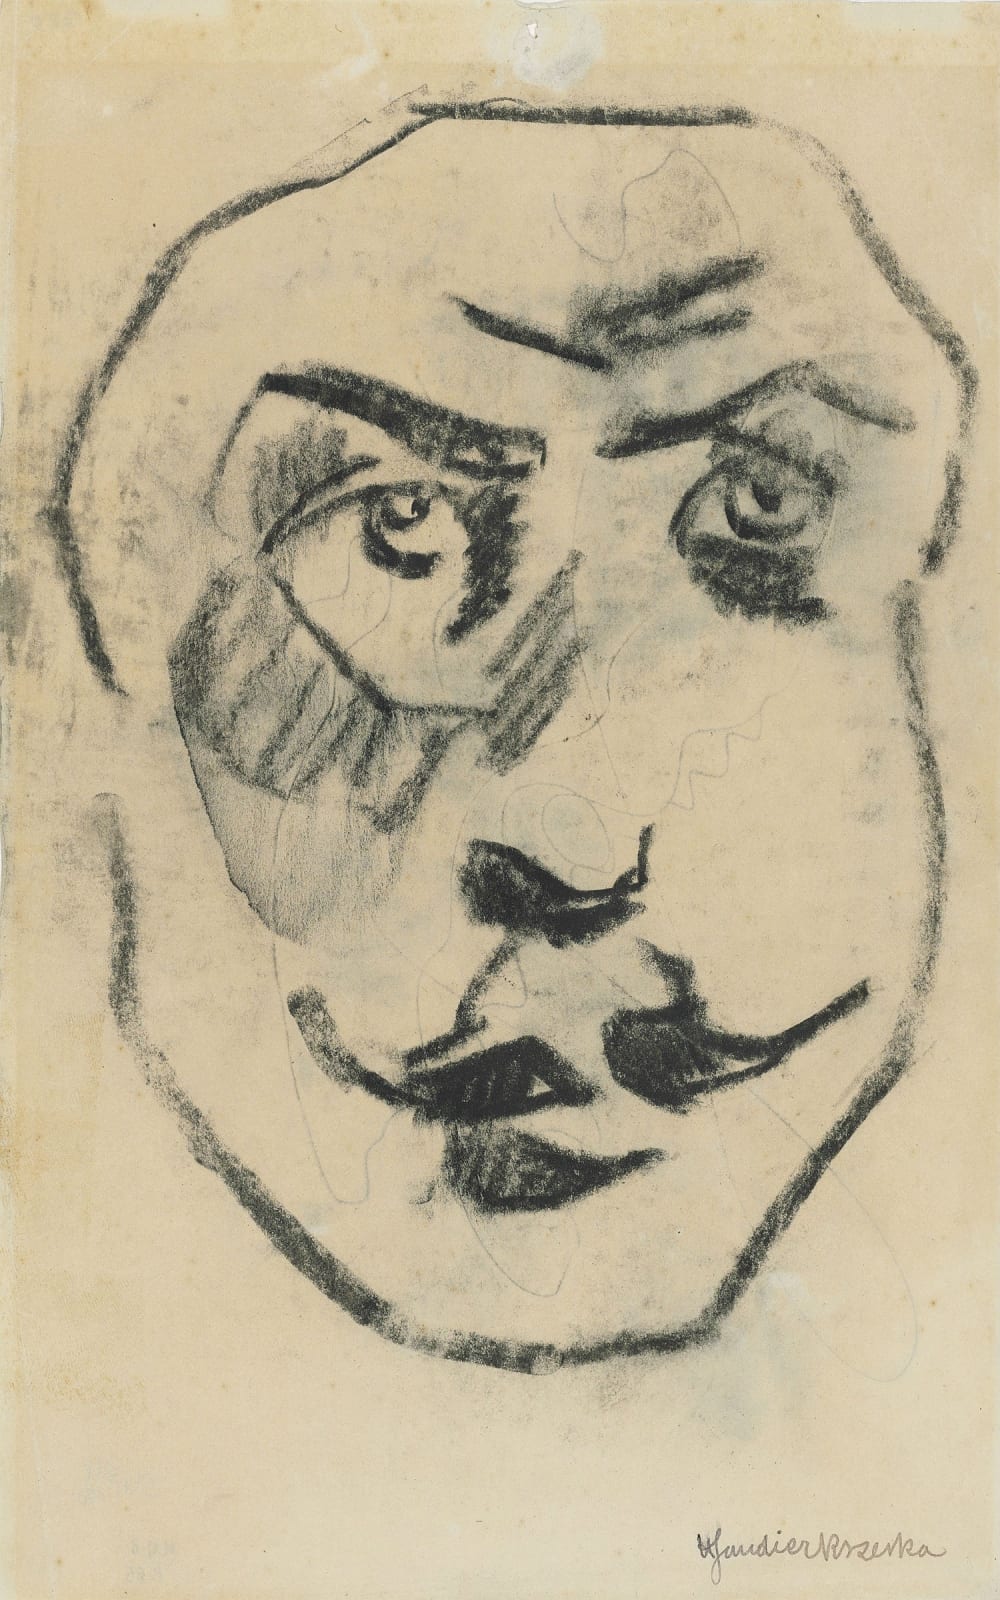 Henri Gaudier-Brzeska (1891-1915) Sculptural Head of Brodzky c. 1913 Black chalk on paper 32.5 x 20 cm Ben Uri Collection To see and discover more about this artist click here